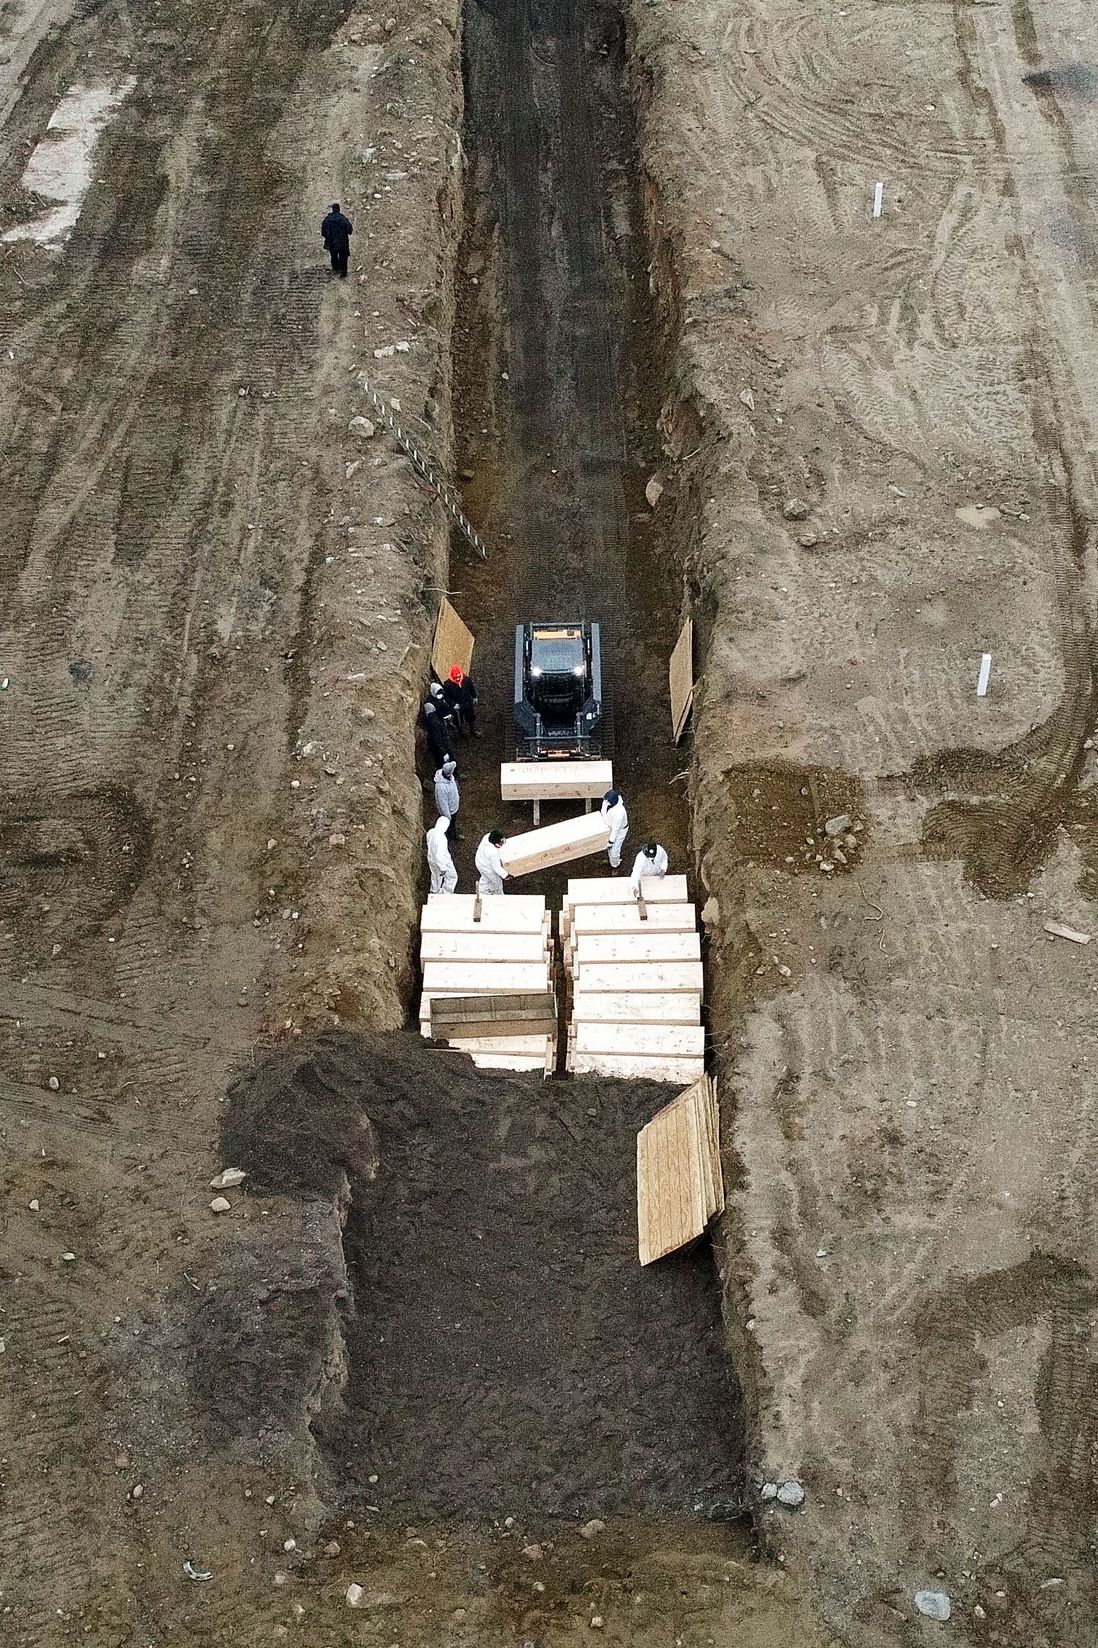 Workers wearing personal protective equipment bury bodies in a trench on Hart Island, in the Bronx on April 9, 2020.